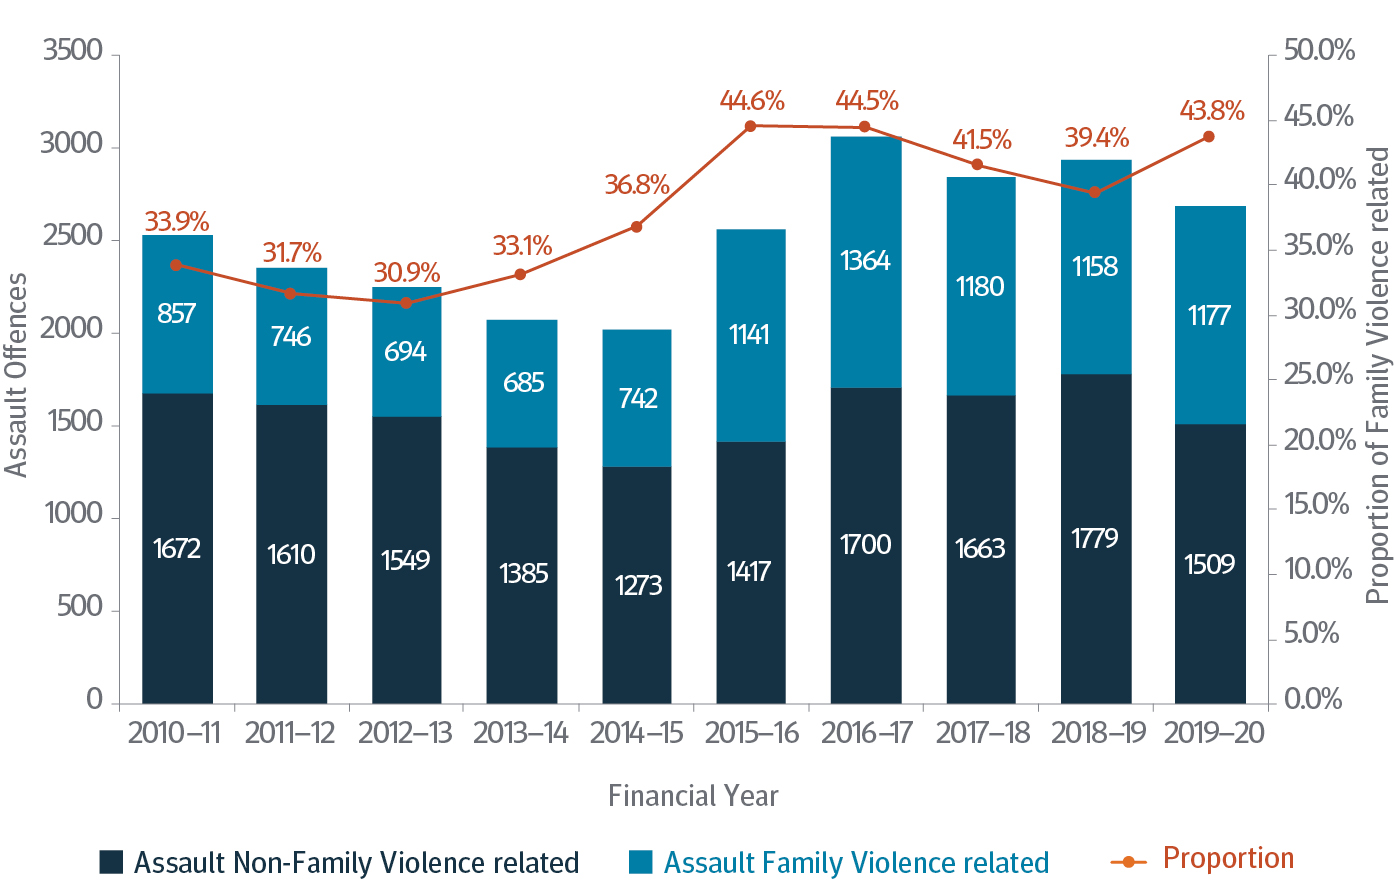 This Figure is a column graph depicting the proportion of family violence related assaults over a 10 year period, from the 2010-11 financial year to the 2019-20 financial year.